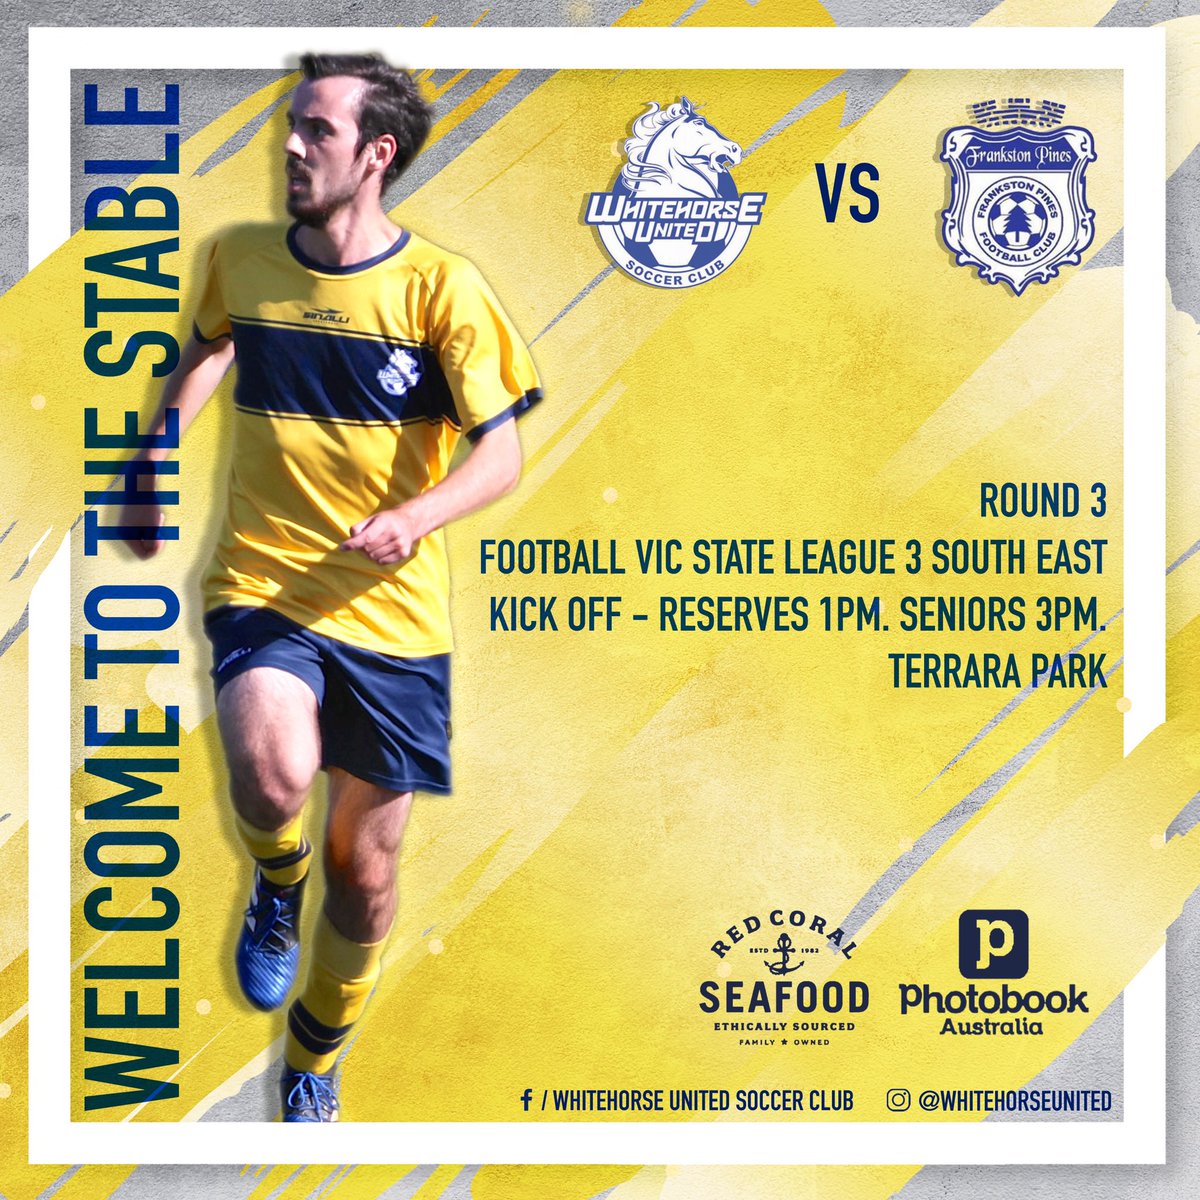 It’s finally time! The first game of the men’s @footballvic league campaign is ON! Tomorrow get down to the Stable to see the lads as we take on Frankston Pines. It’s going to be an exciting season so don’t miss the opener!#whitehorseunited #upthehorse #terrarapark 🔥🐴🔥🐴